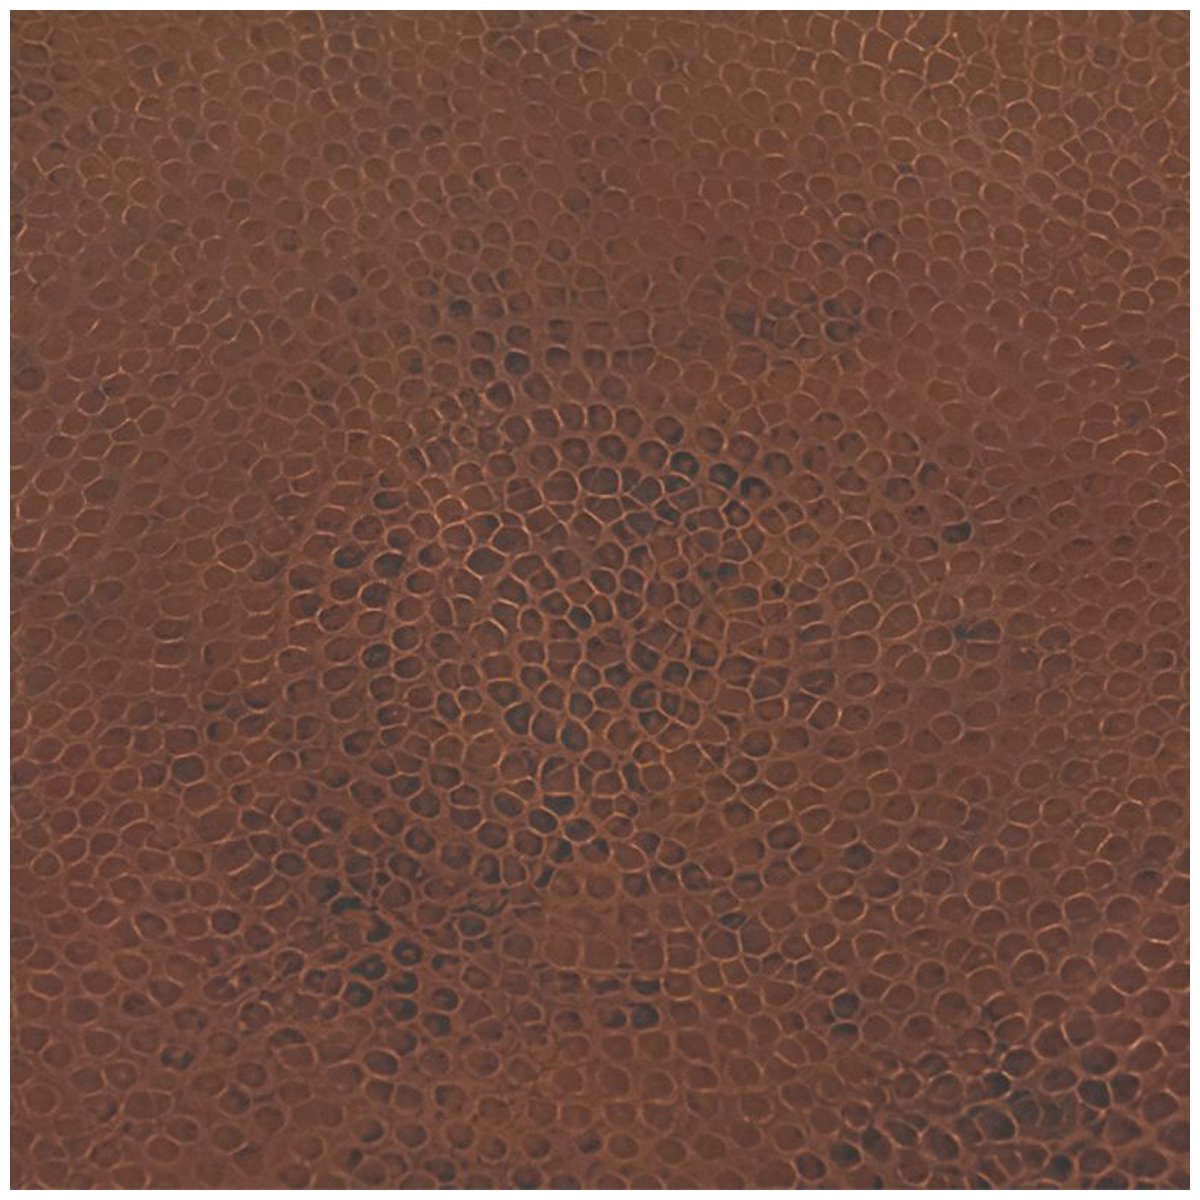 Premier Copper Products Round Hammered Copper Table Top